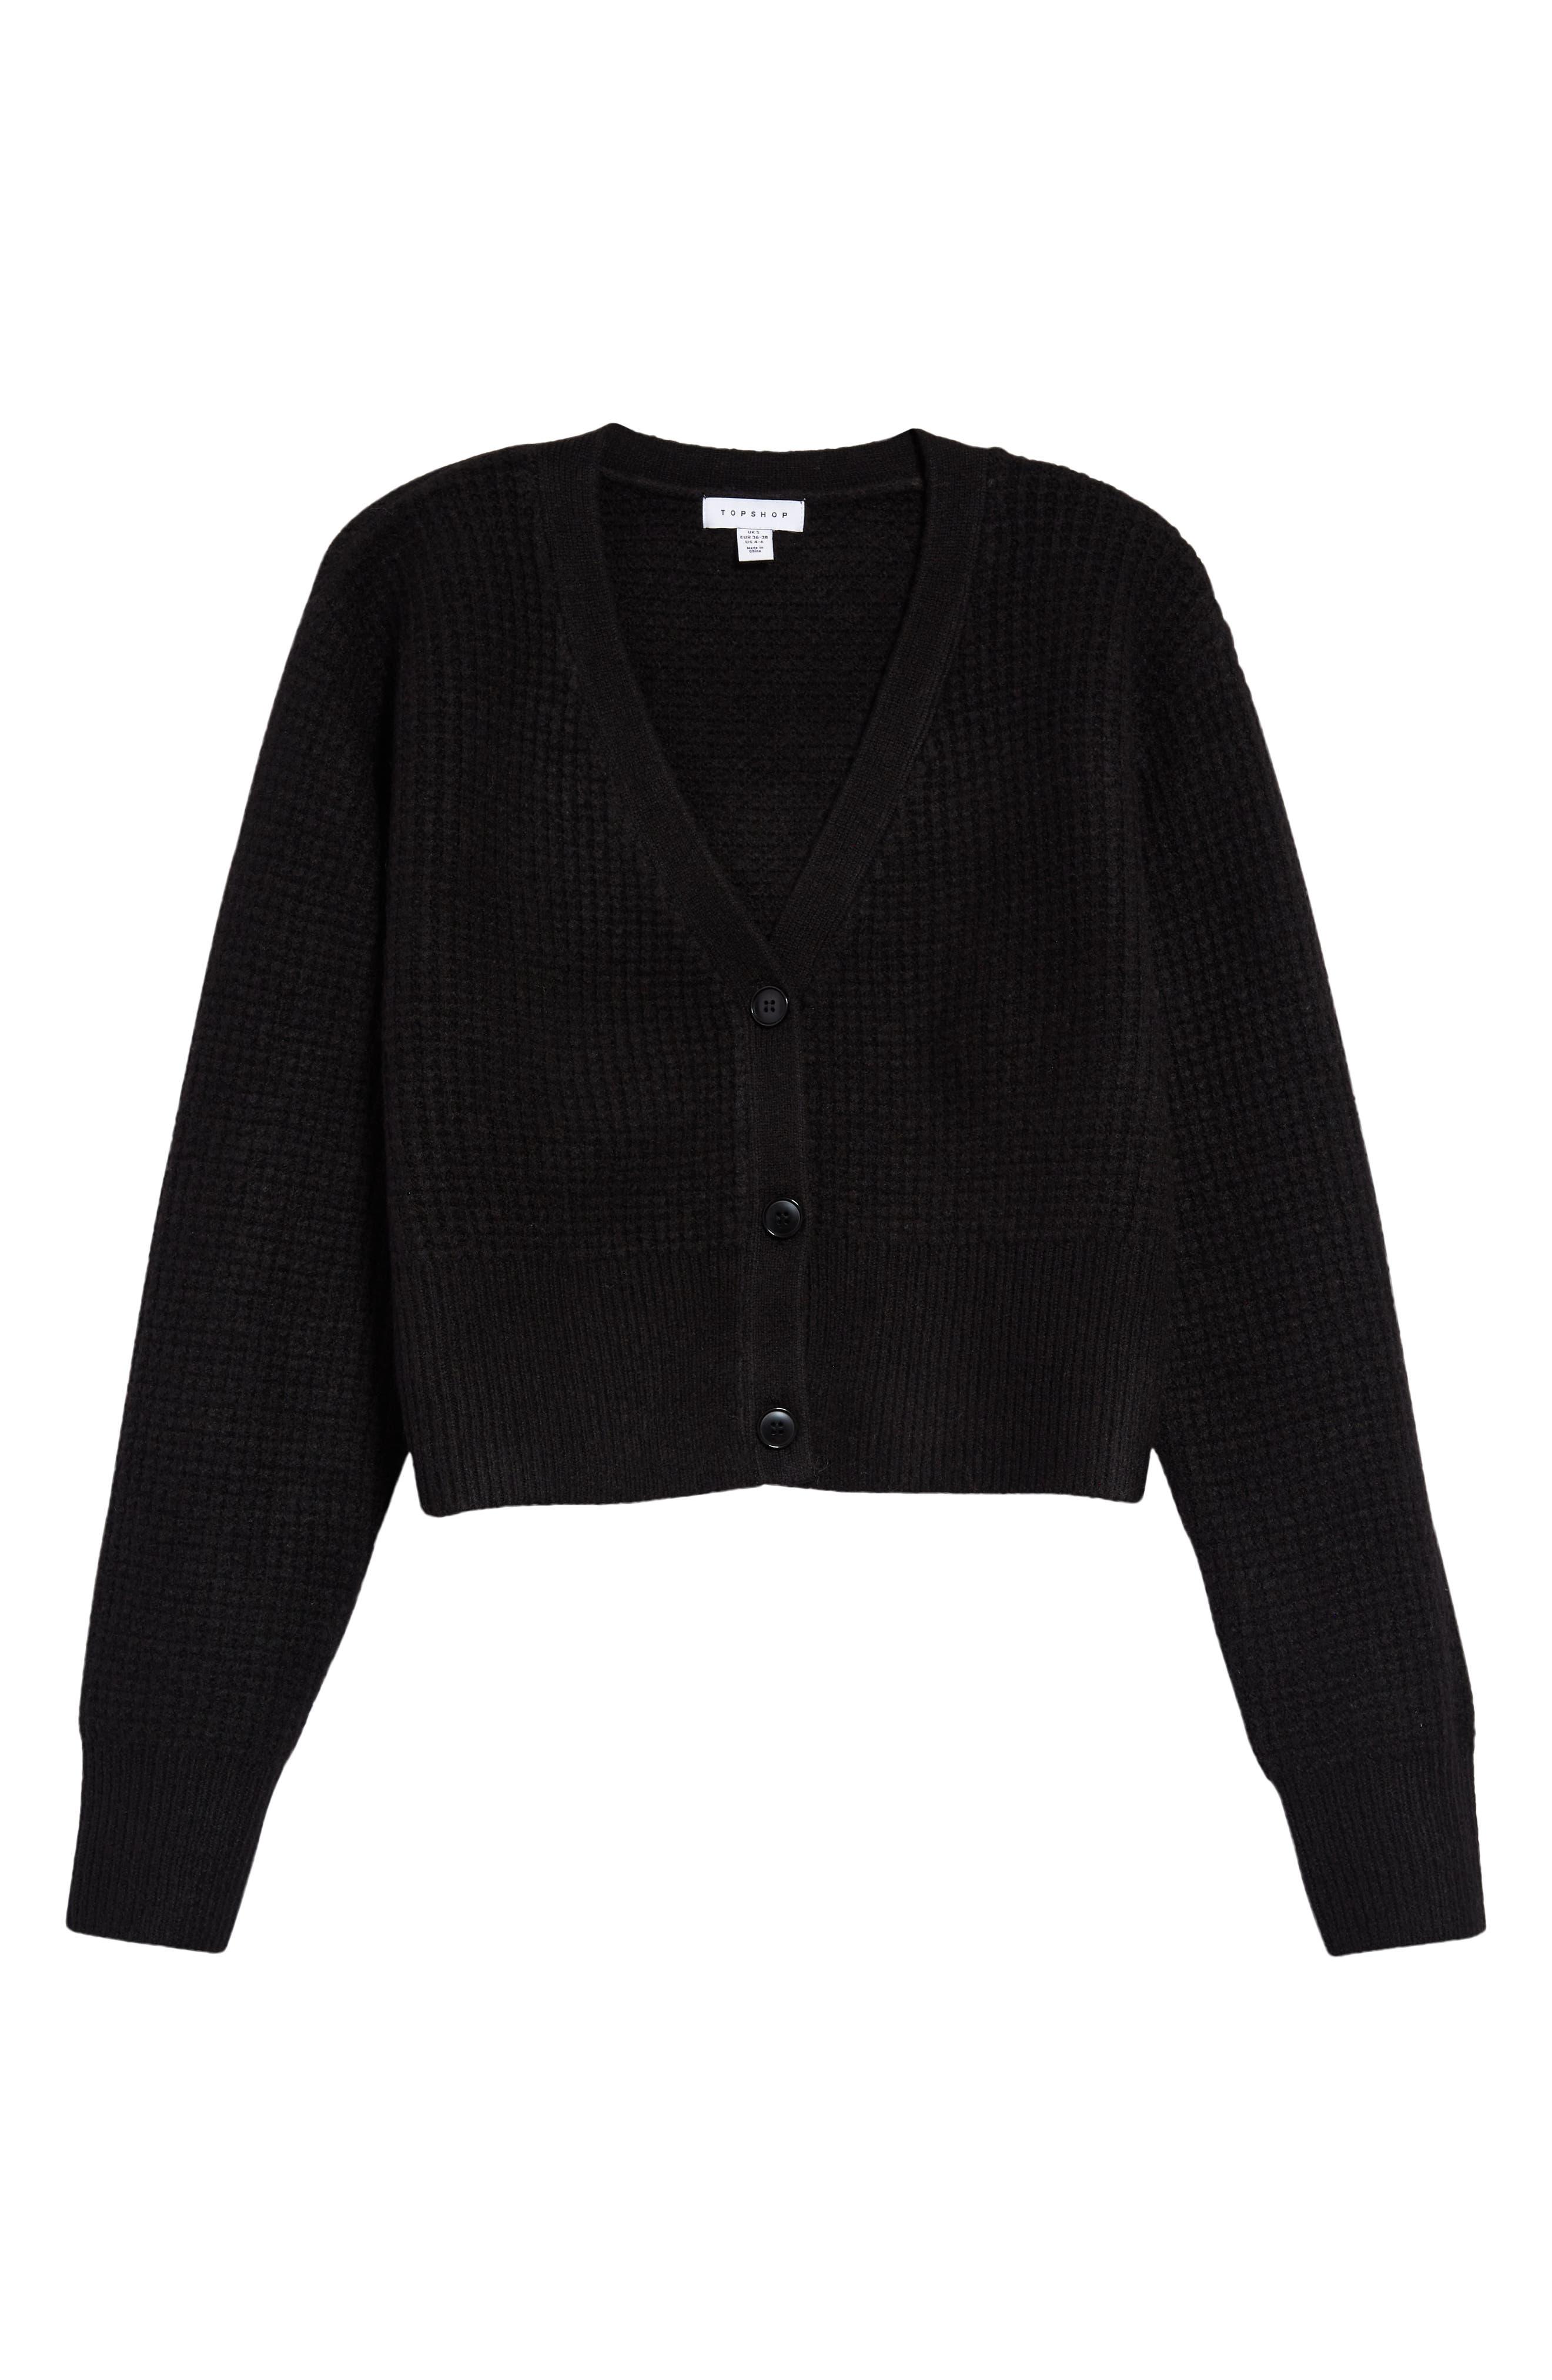 TOPSHOP Waffle Knit Crop Cardigan In Black At Nordstrom Rack | Lyst